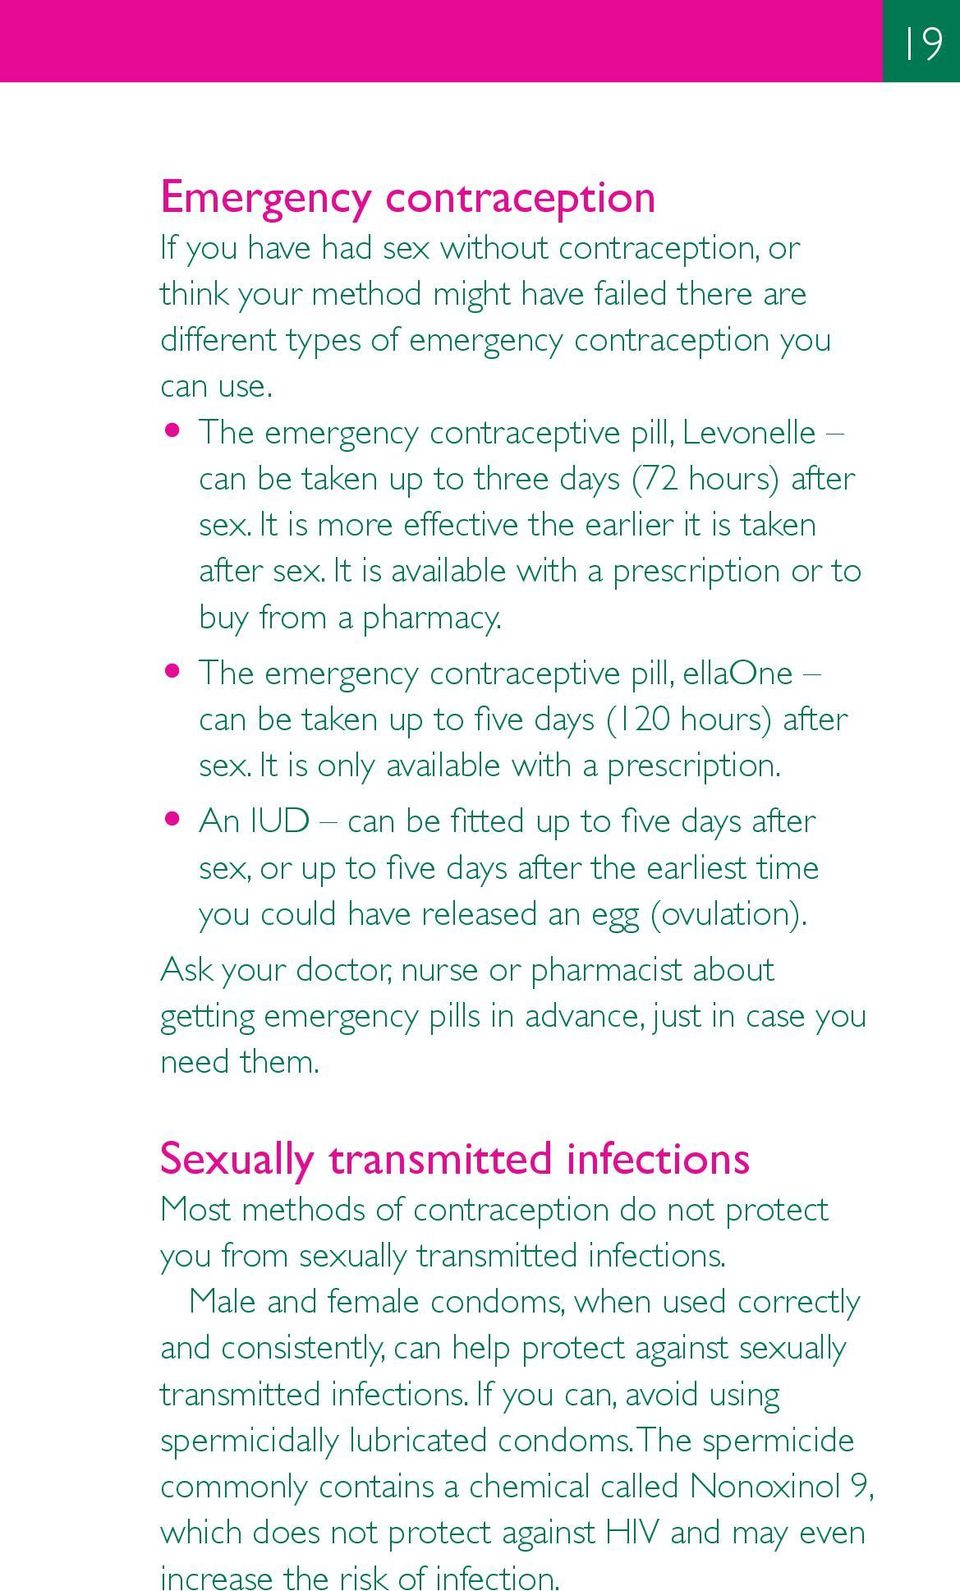 It is available with a prescription or to buy from a pharmacy. O The emergency contraceptive pill, ellaone can be taken up to five days (120 hours) after sex. It is only available with a prescription.